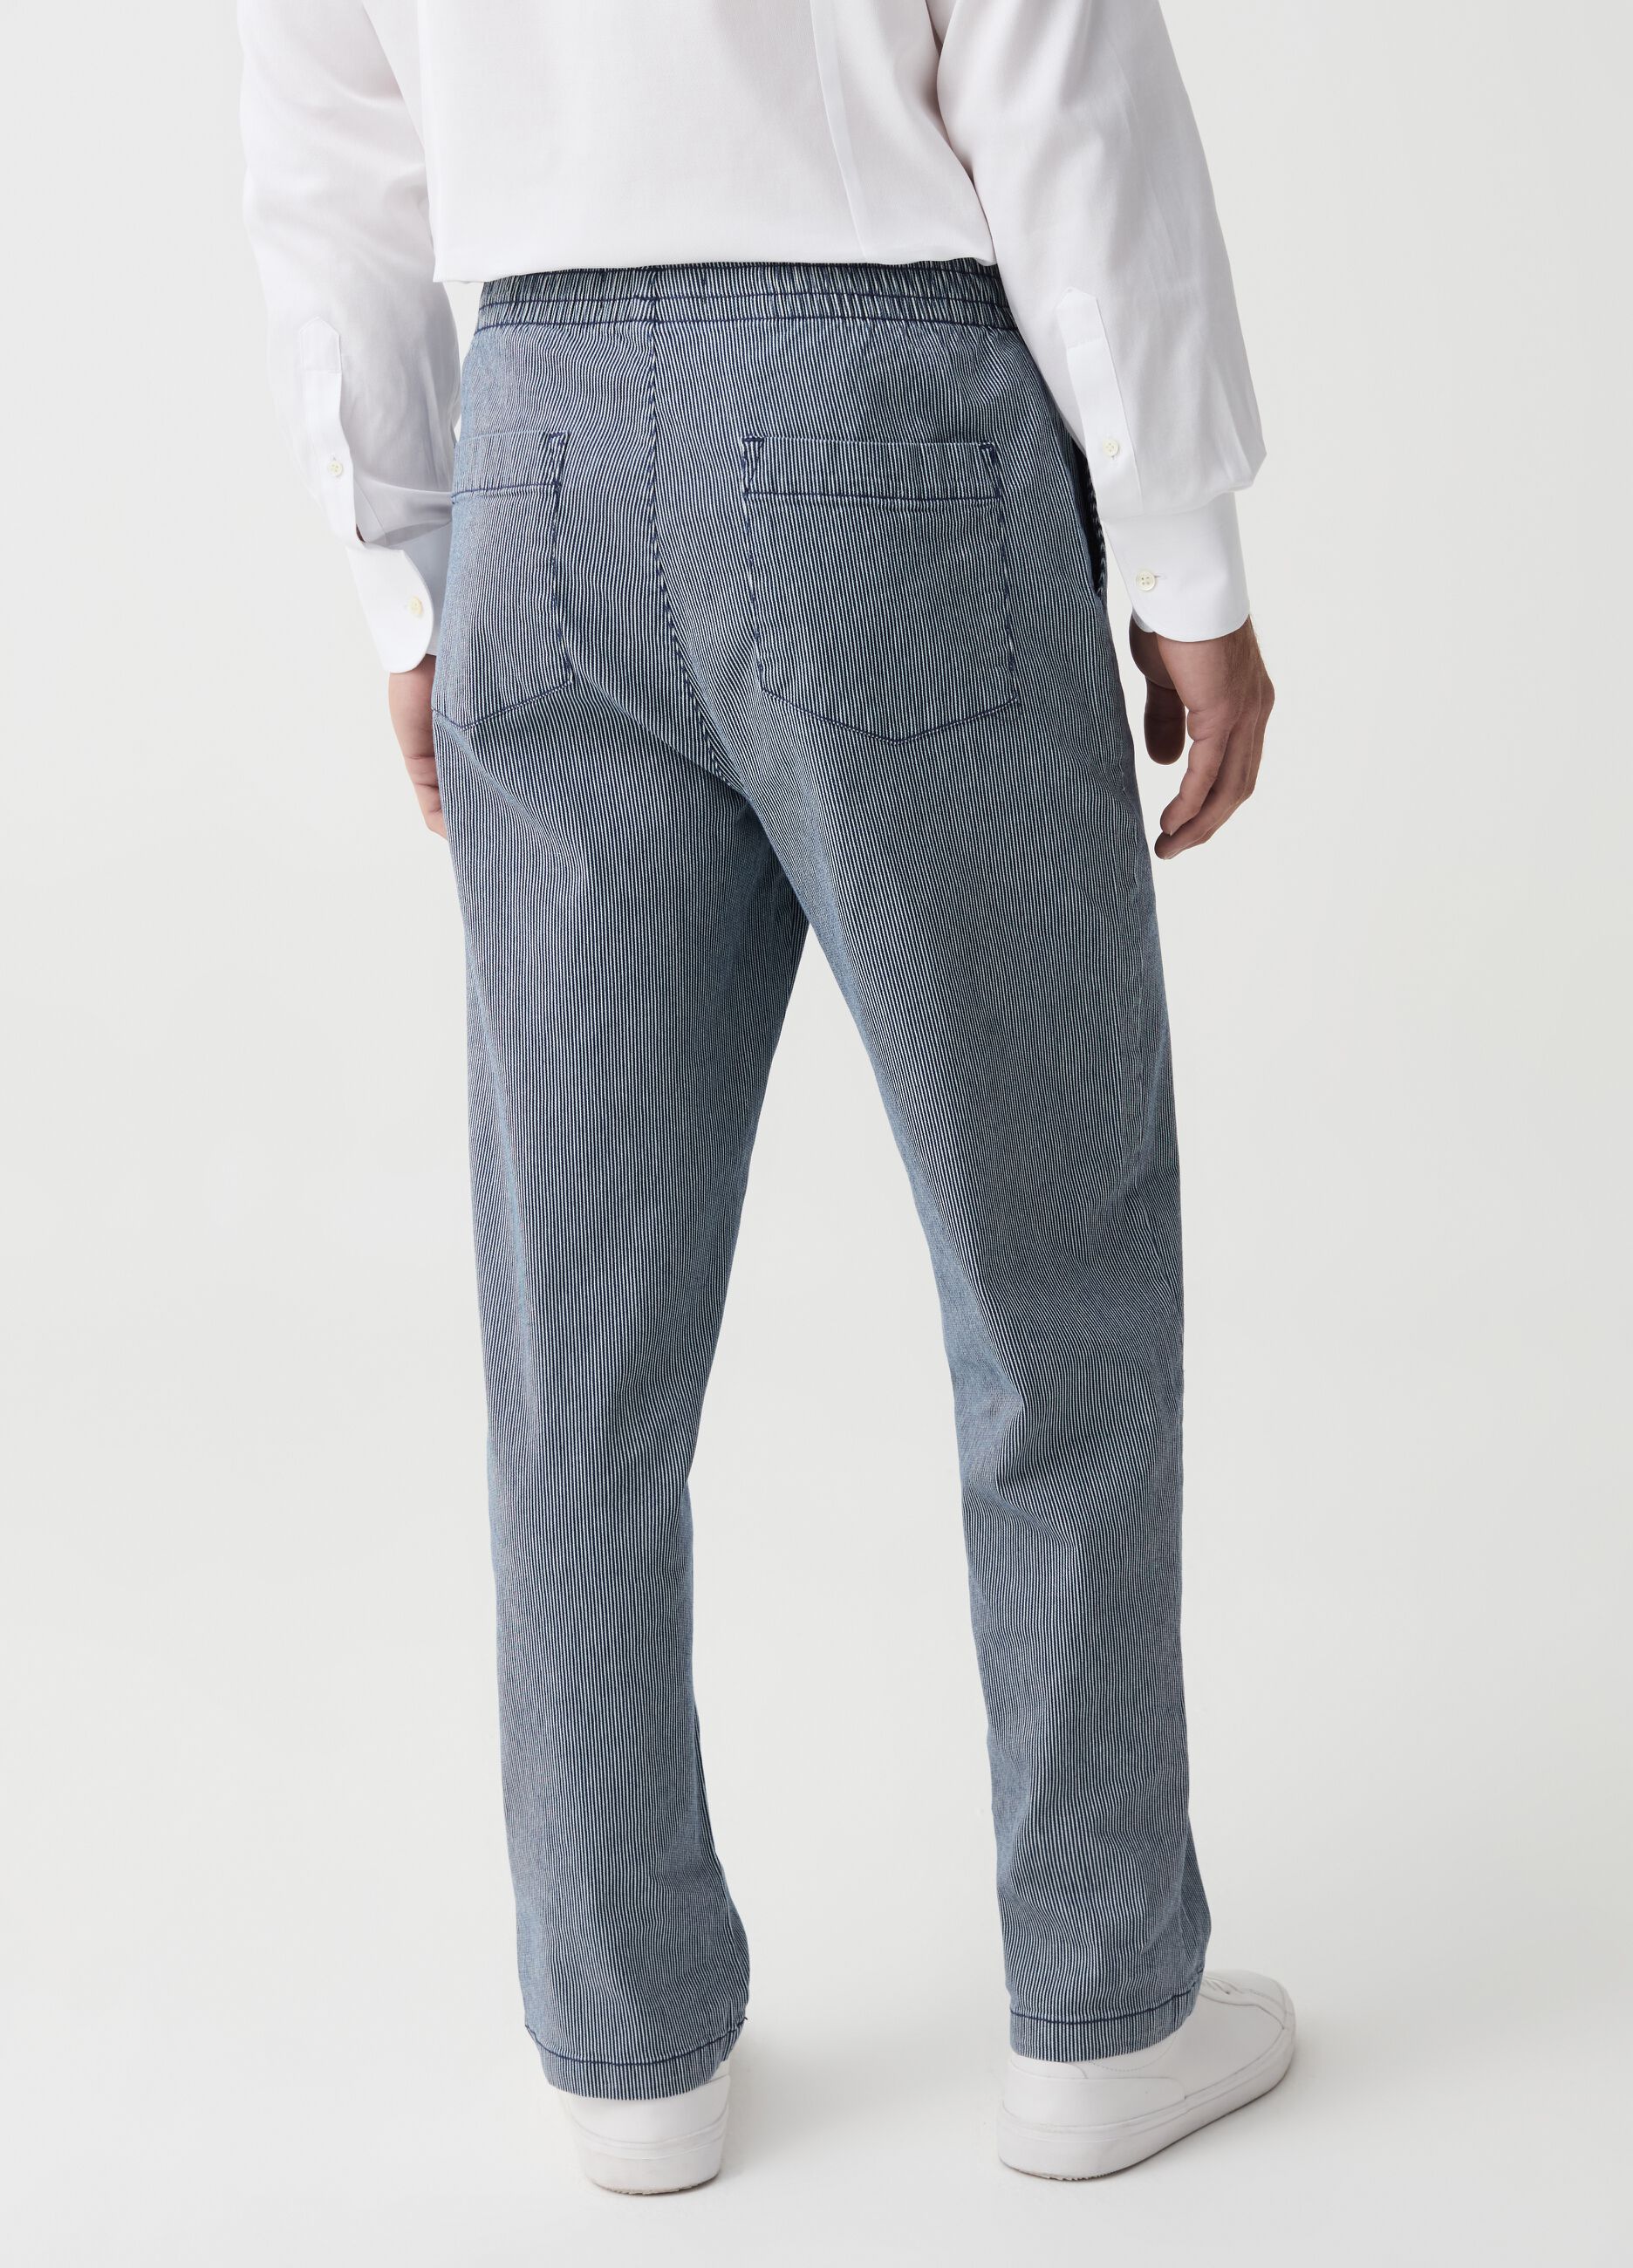 Pantalone chino jogger relaxed fit a righe